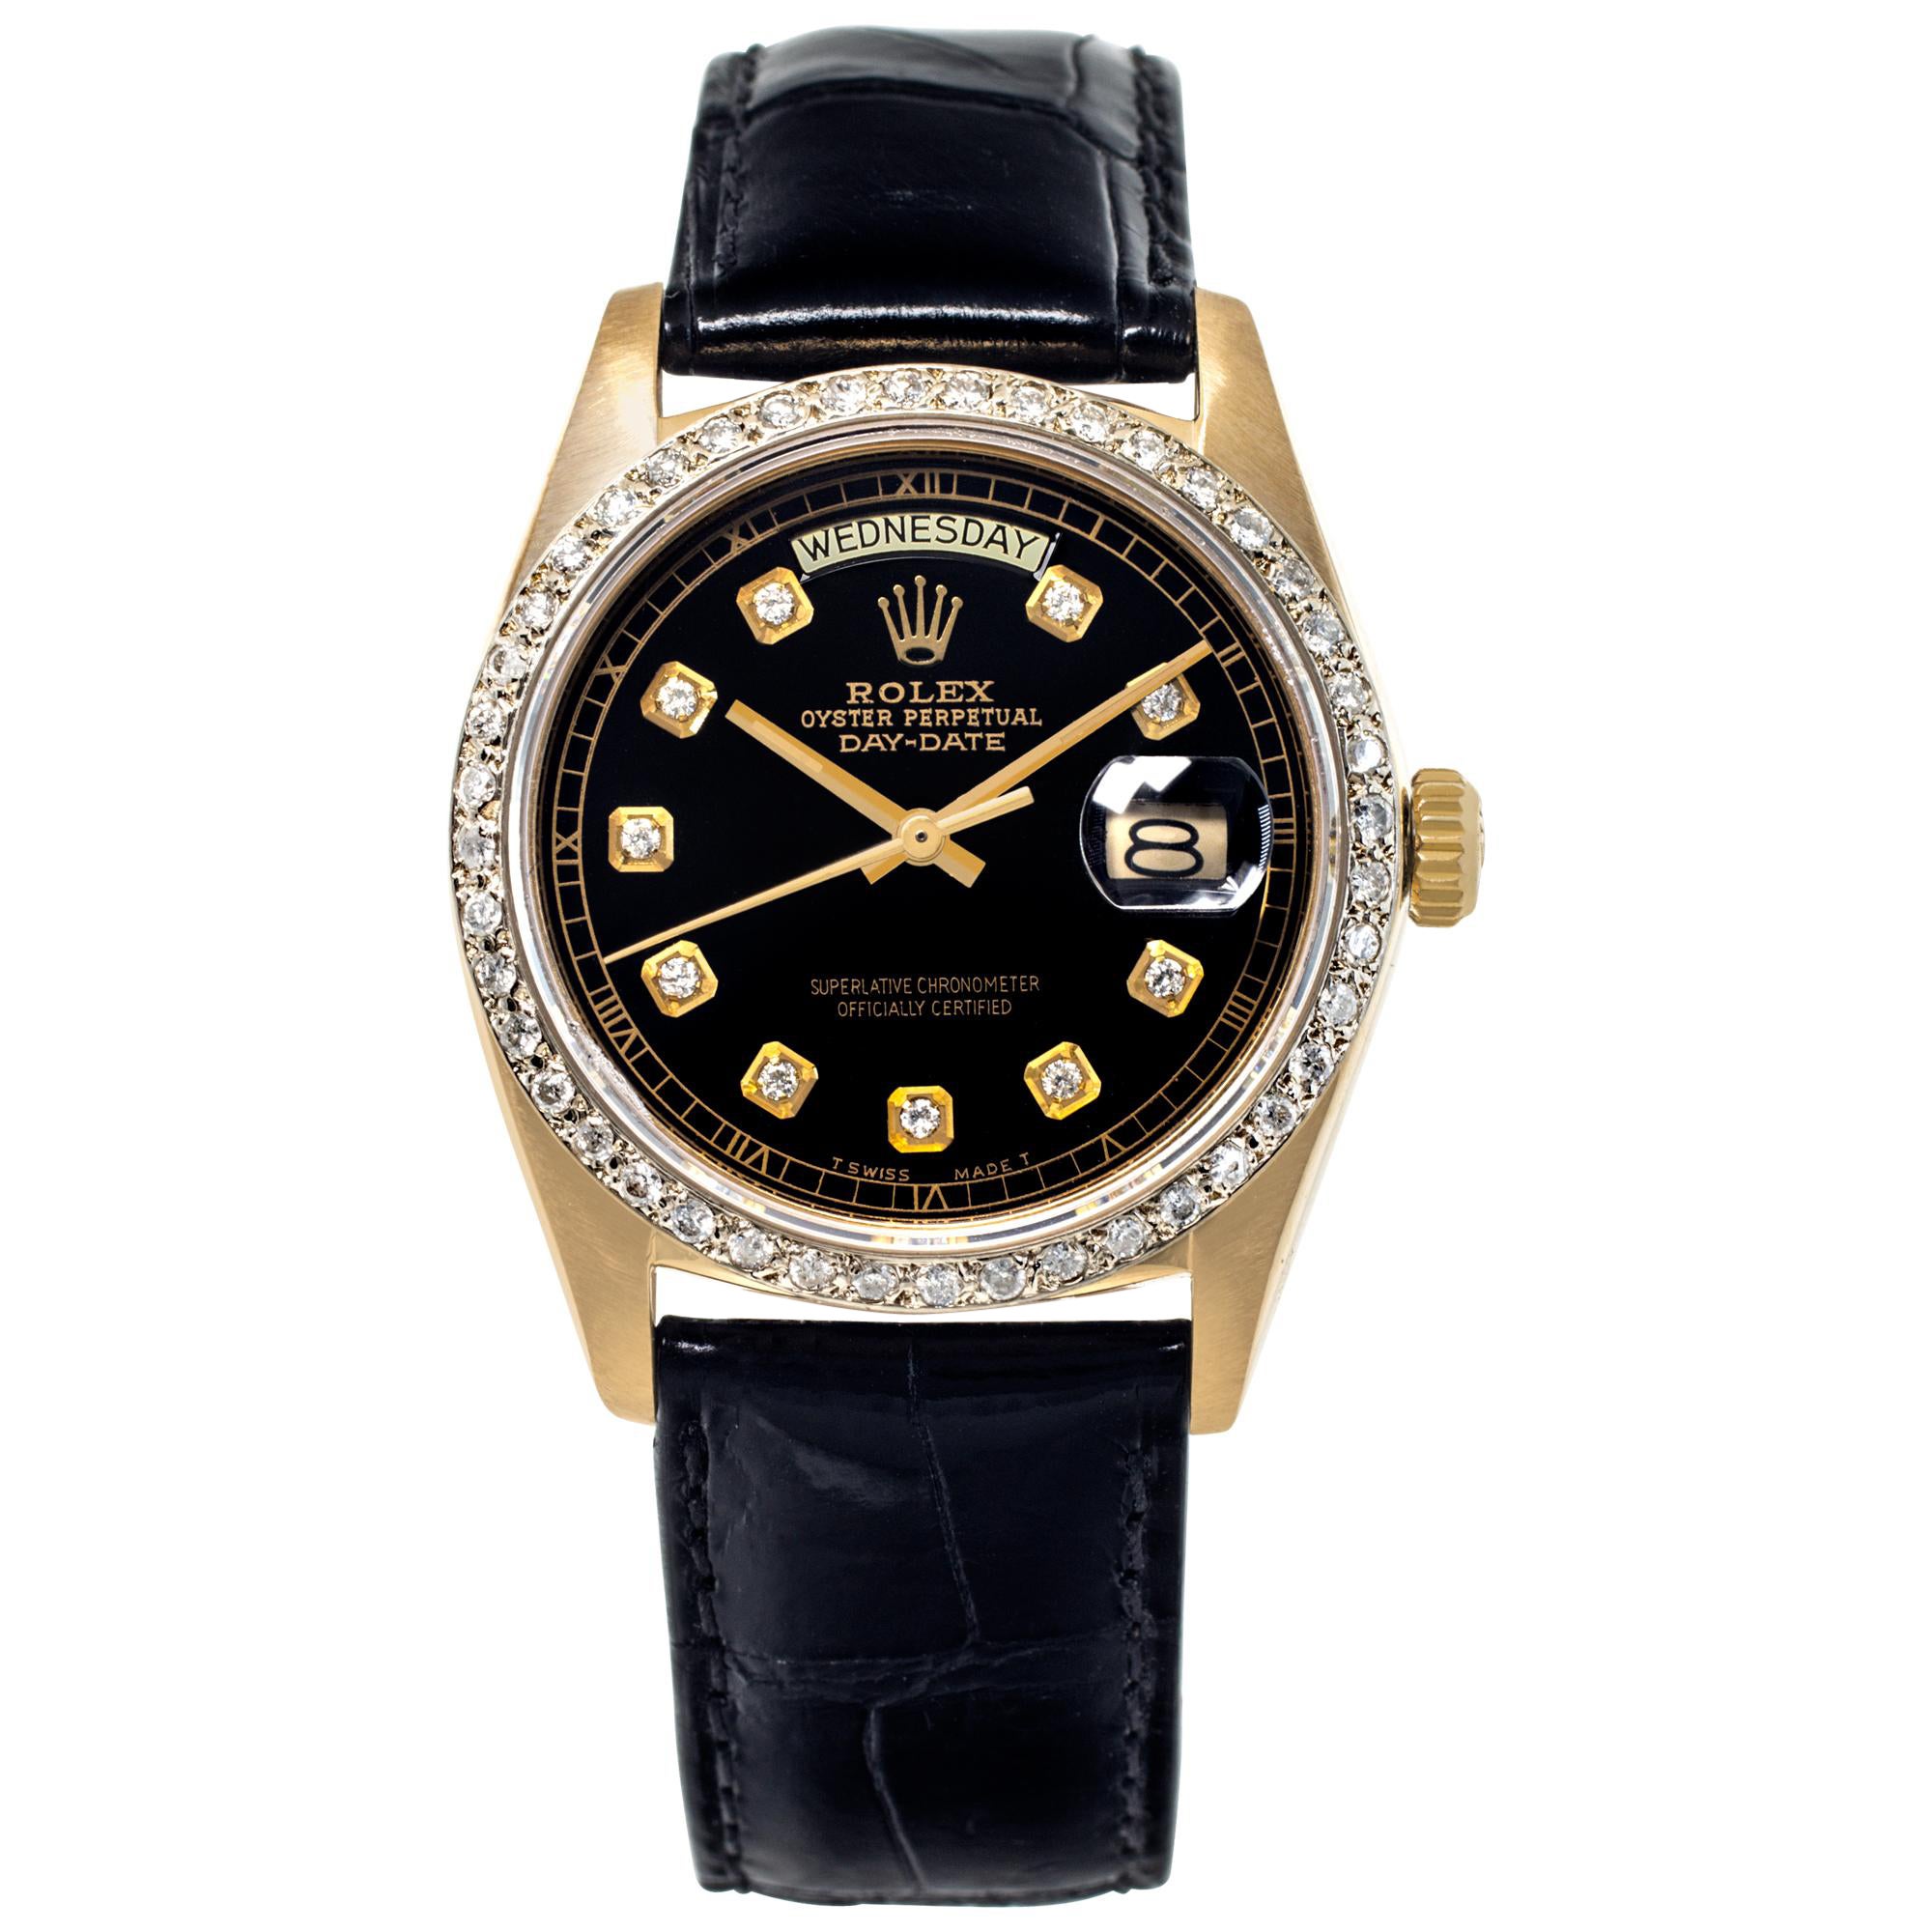 Rolex Day-Date 18k yellow gold Automatic Wristwatch Ref 18038 For Sale